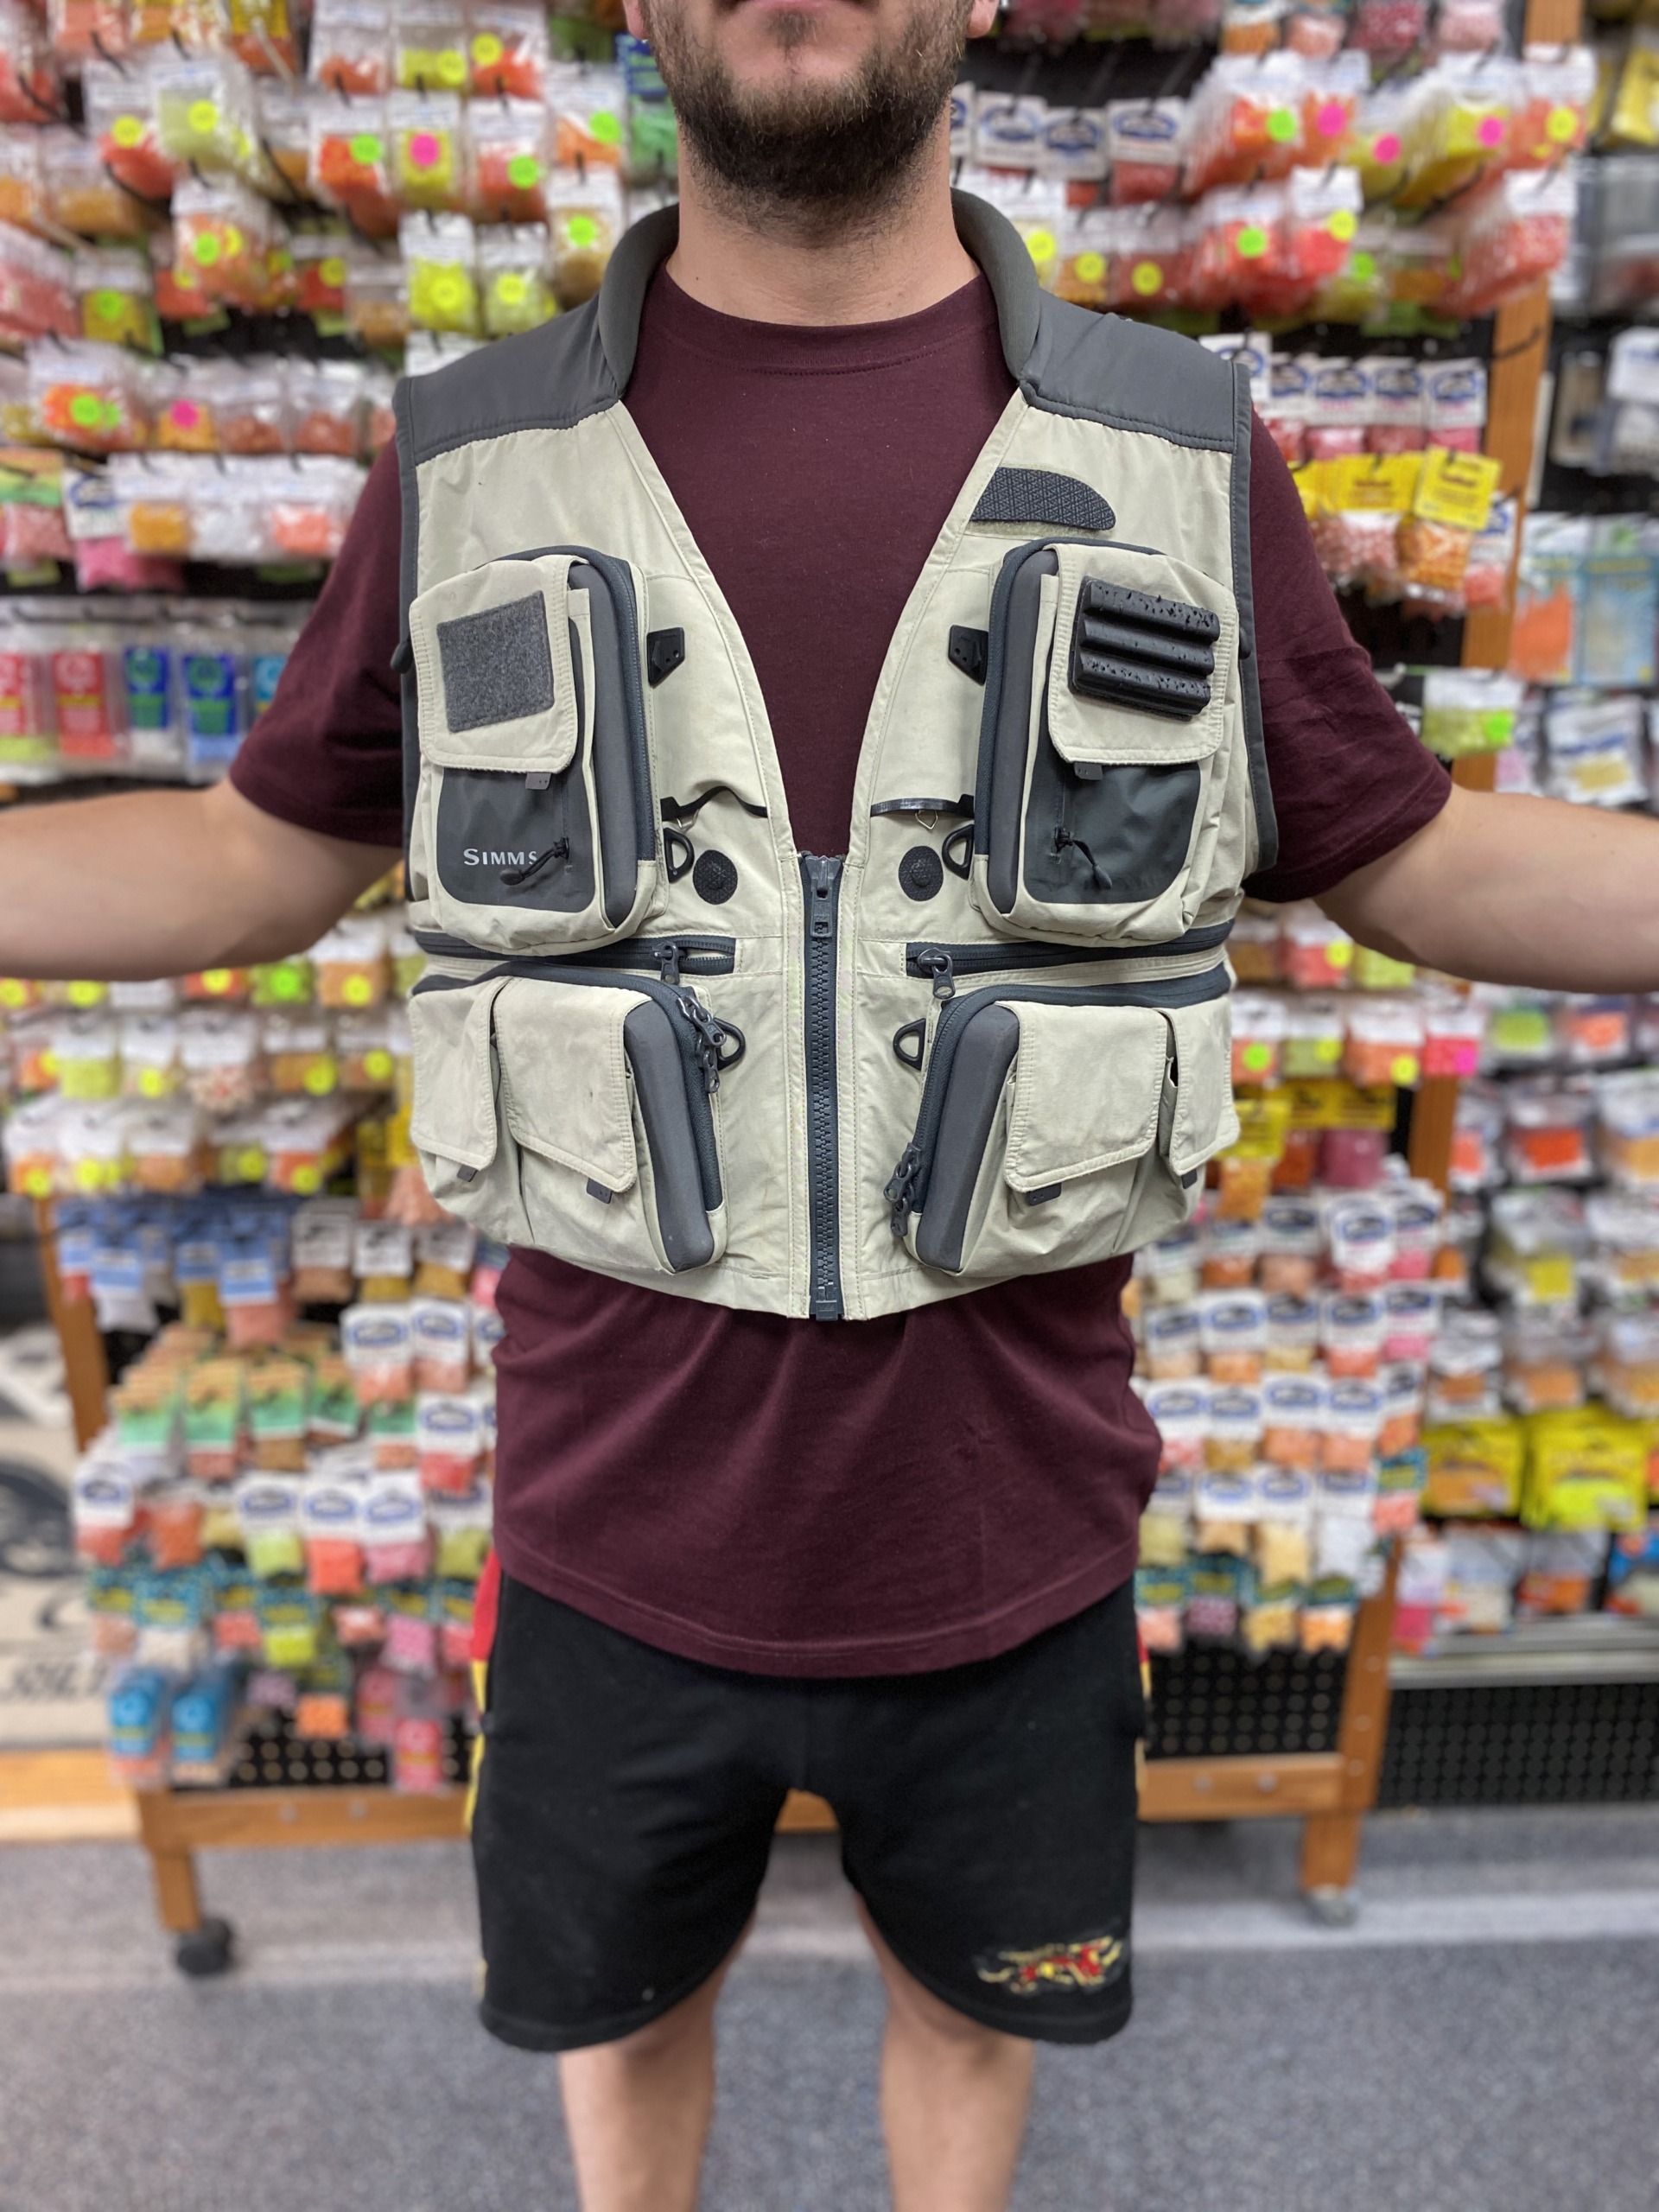 https://thefirstcast.ca/wp-content/uploads/2022/10/Simms-G3-Guide-Vest-XL-A-scaled.jpg